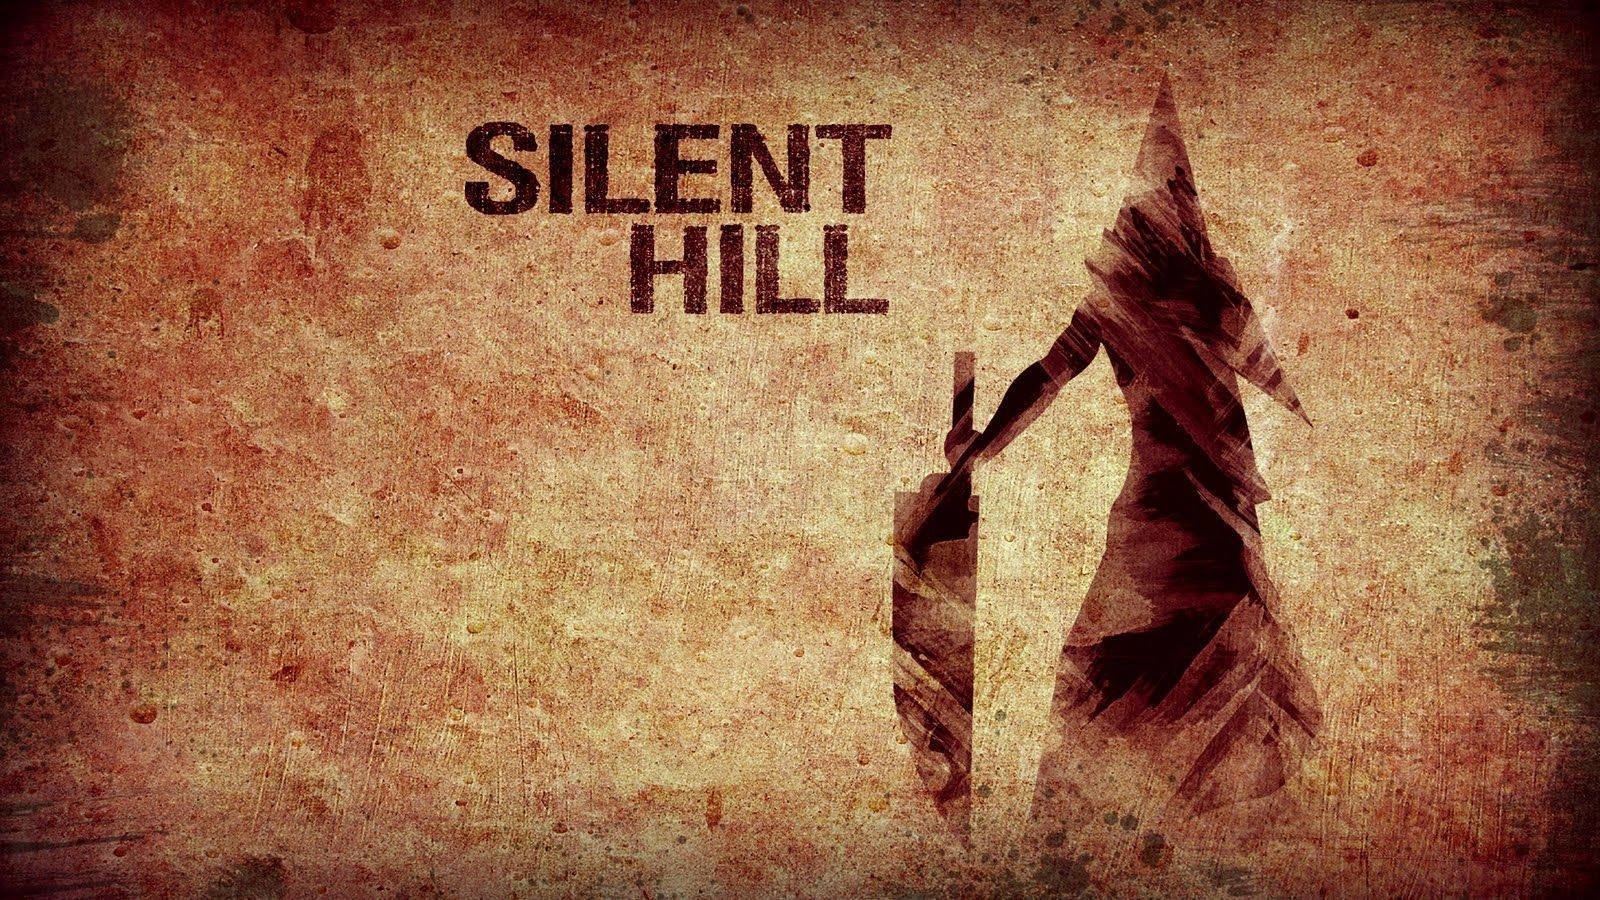 Silent Hill Scary Pyramid Head Wallpaper